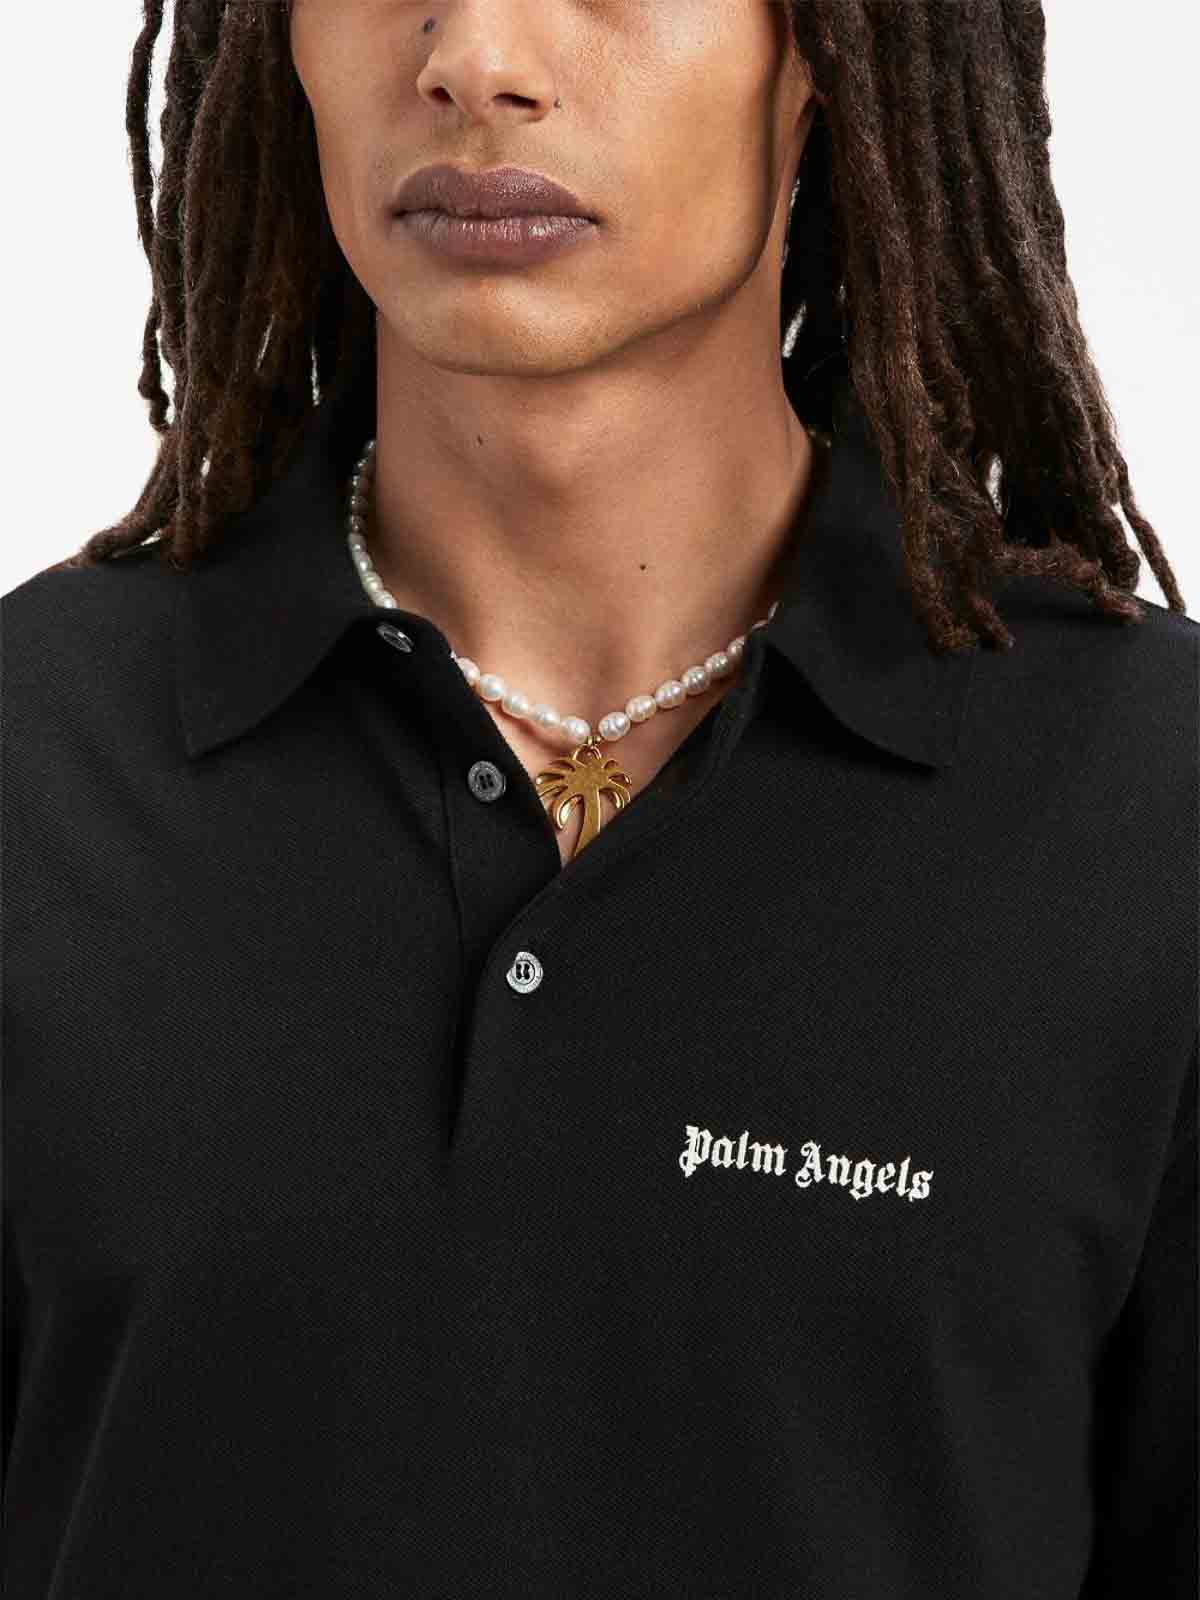 Shop Palm Angels Embroidered Logo Cotton Polo Shirt In Black